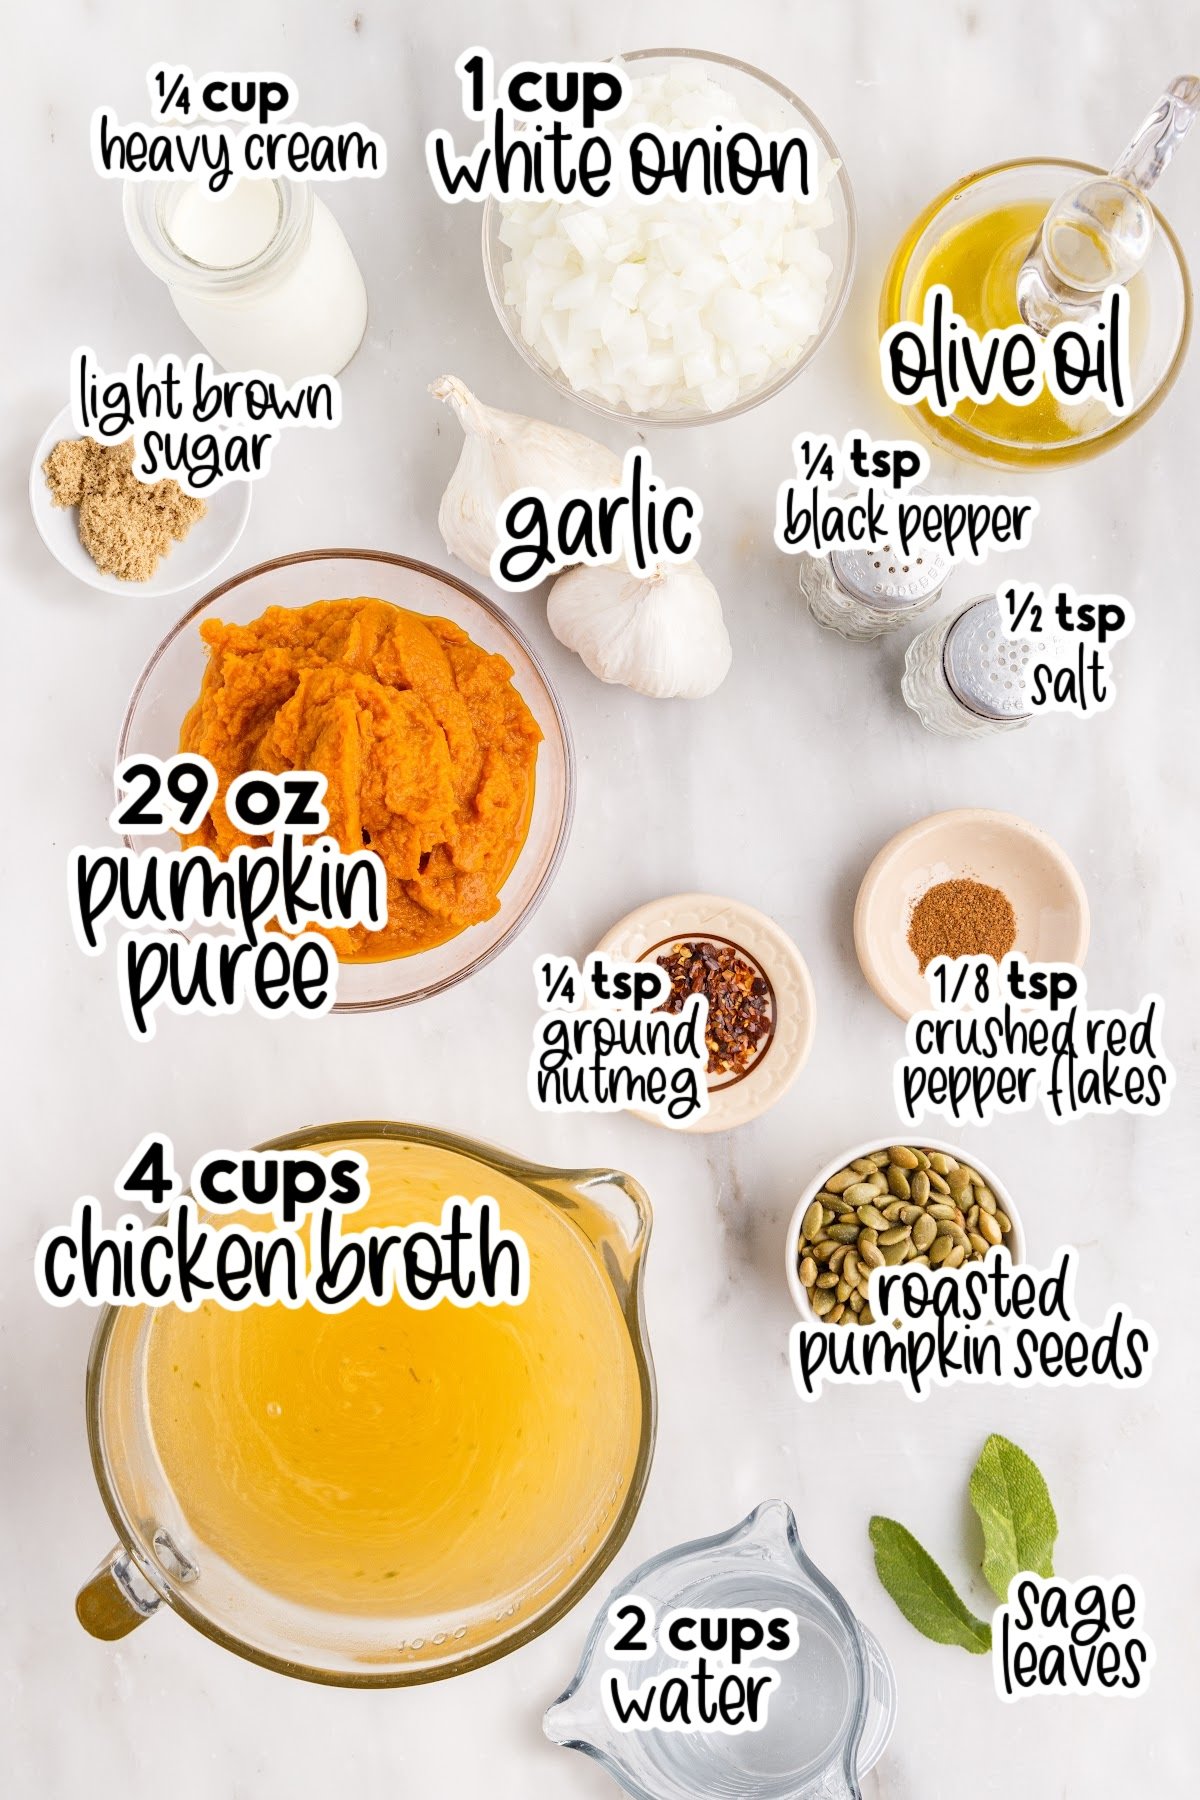 Ingredients needed to make pumpkin soup with canned pumpkin, with text labels.